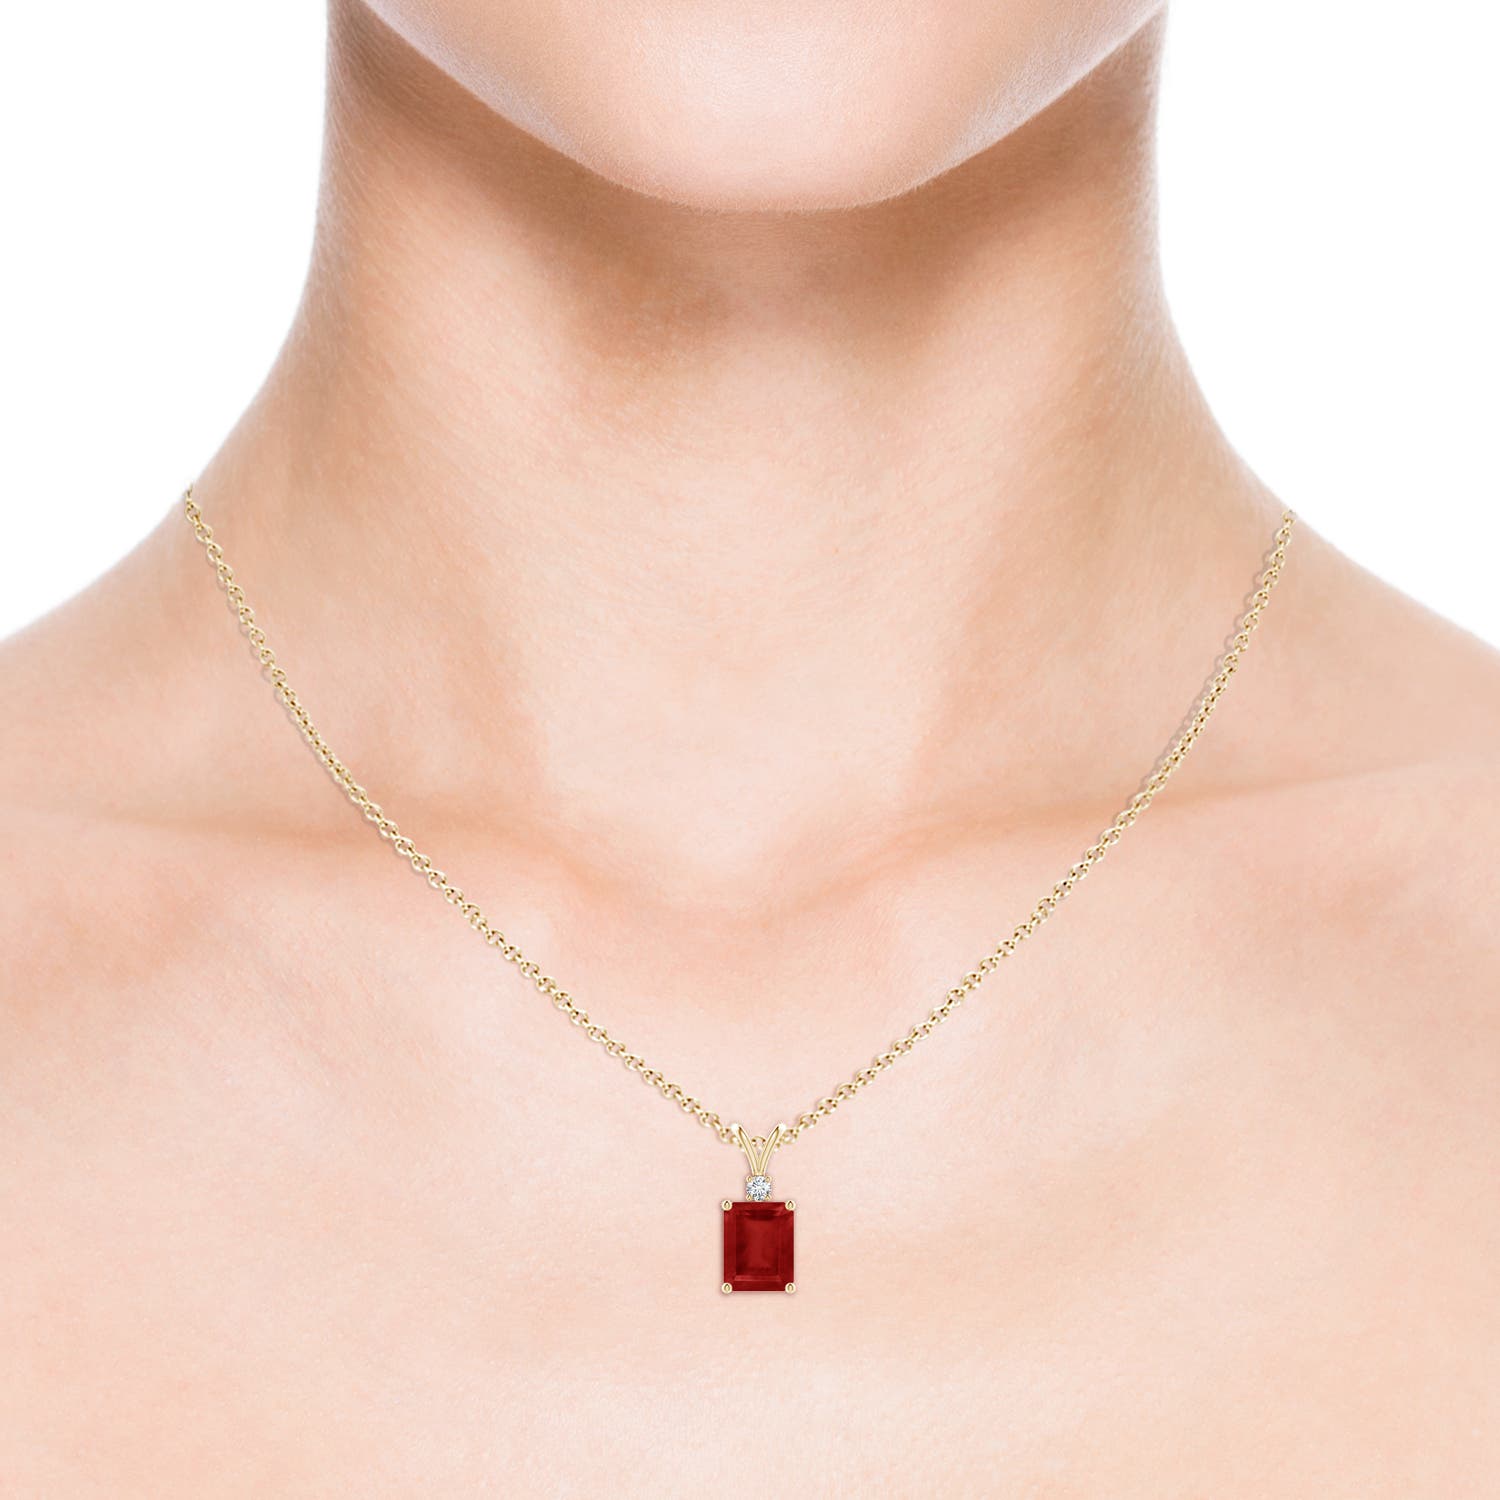 AA - Ruby / 3.07 CT / 14 KT Yellow Gold